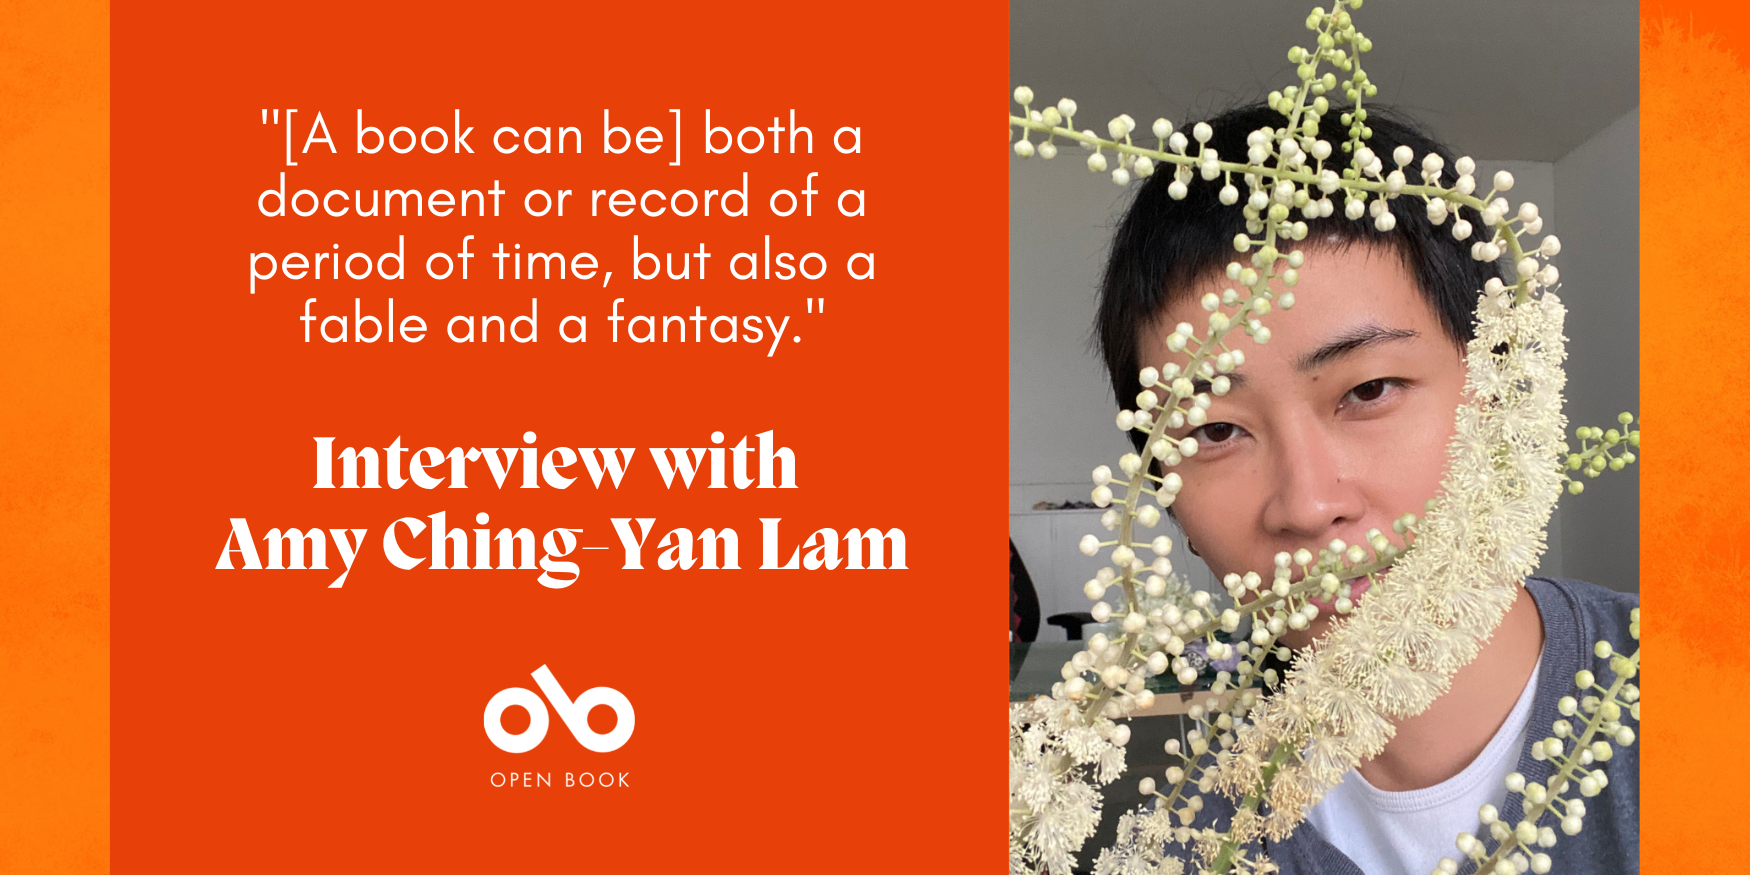 Orange graphic with text reading ""[A book can be] both a document or record of a period of time, but also a fable and a fantasy. Interview with Amy Ching-Yan Lam" Photo of author Amy Ching-Yan Lam